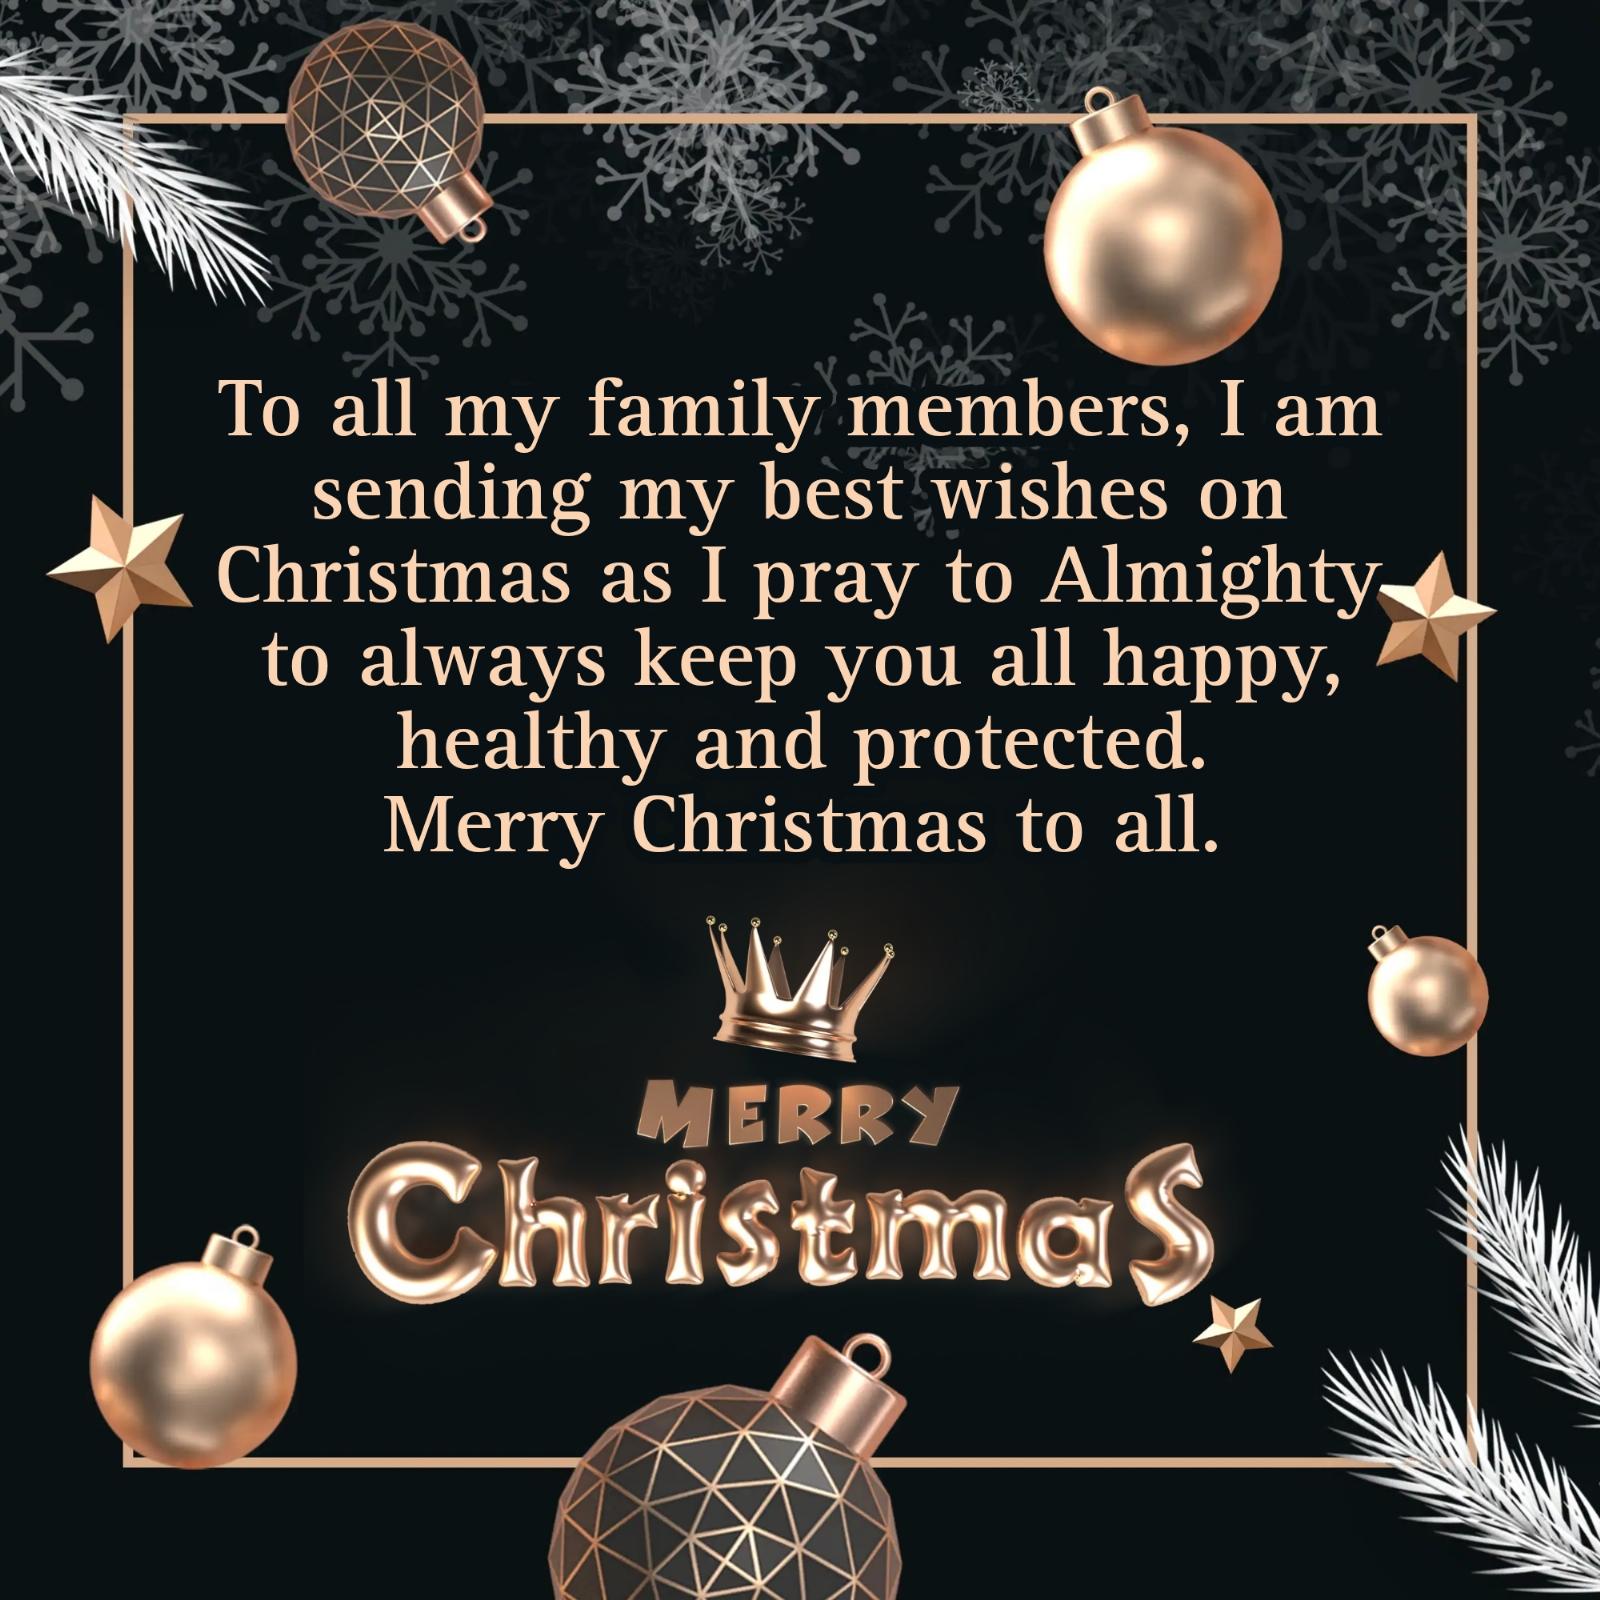 To all my family members I am sending my best wishes